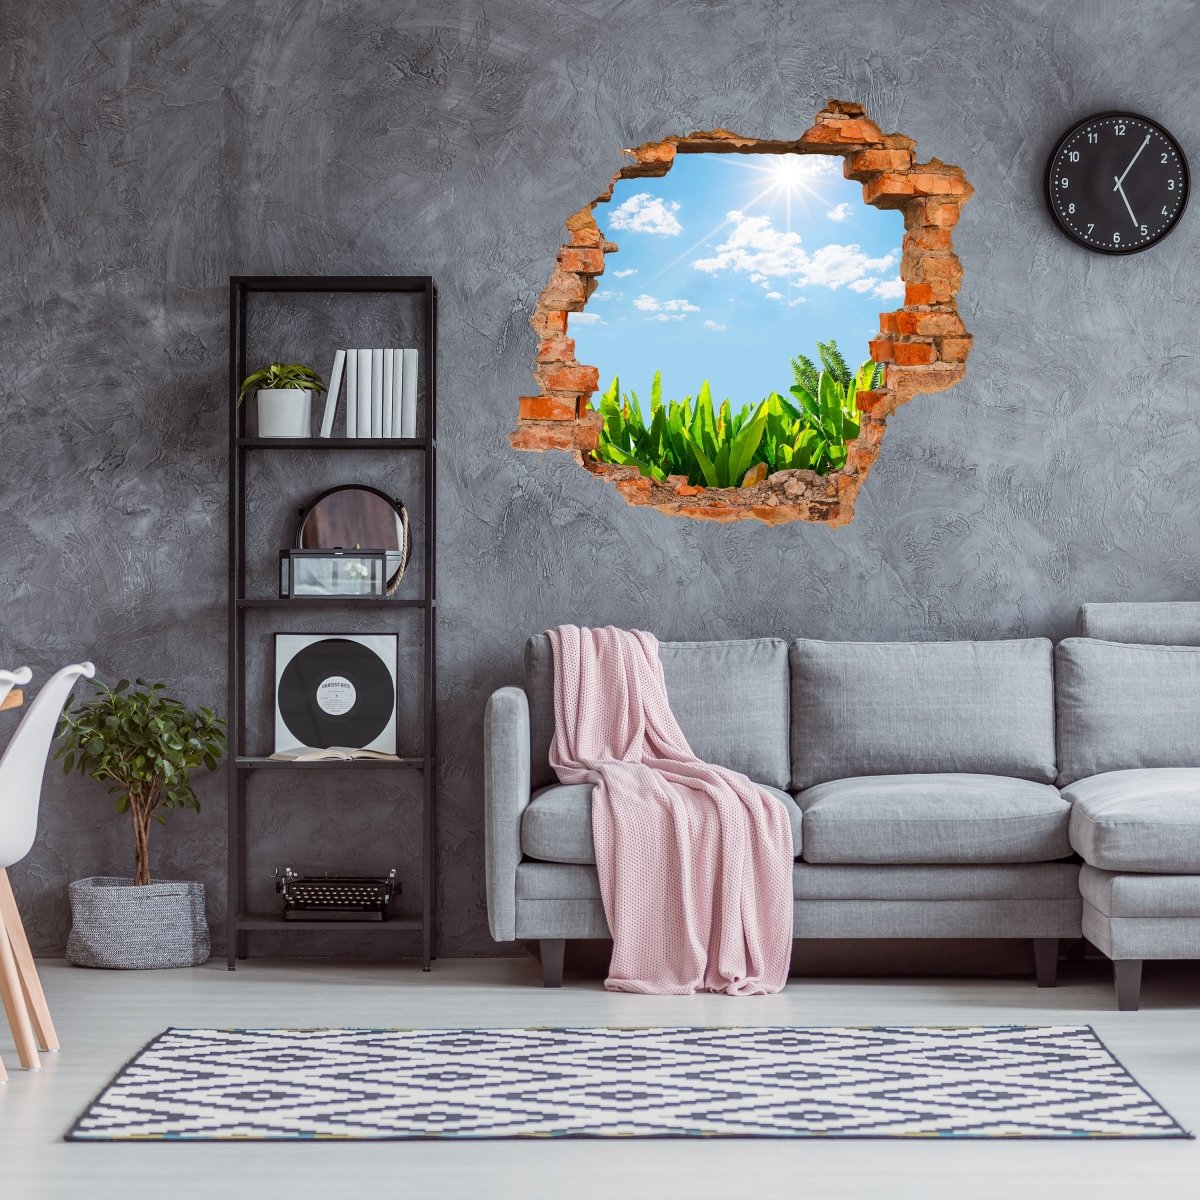 3D wall sticker banana trees in the sun, tropical - Wall Decal M1210